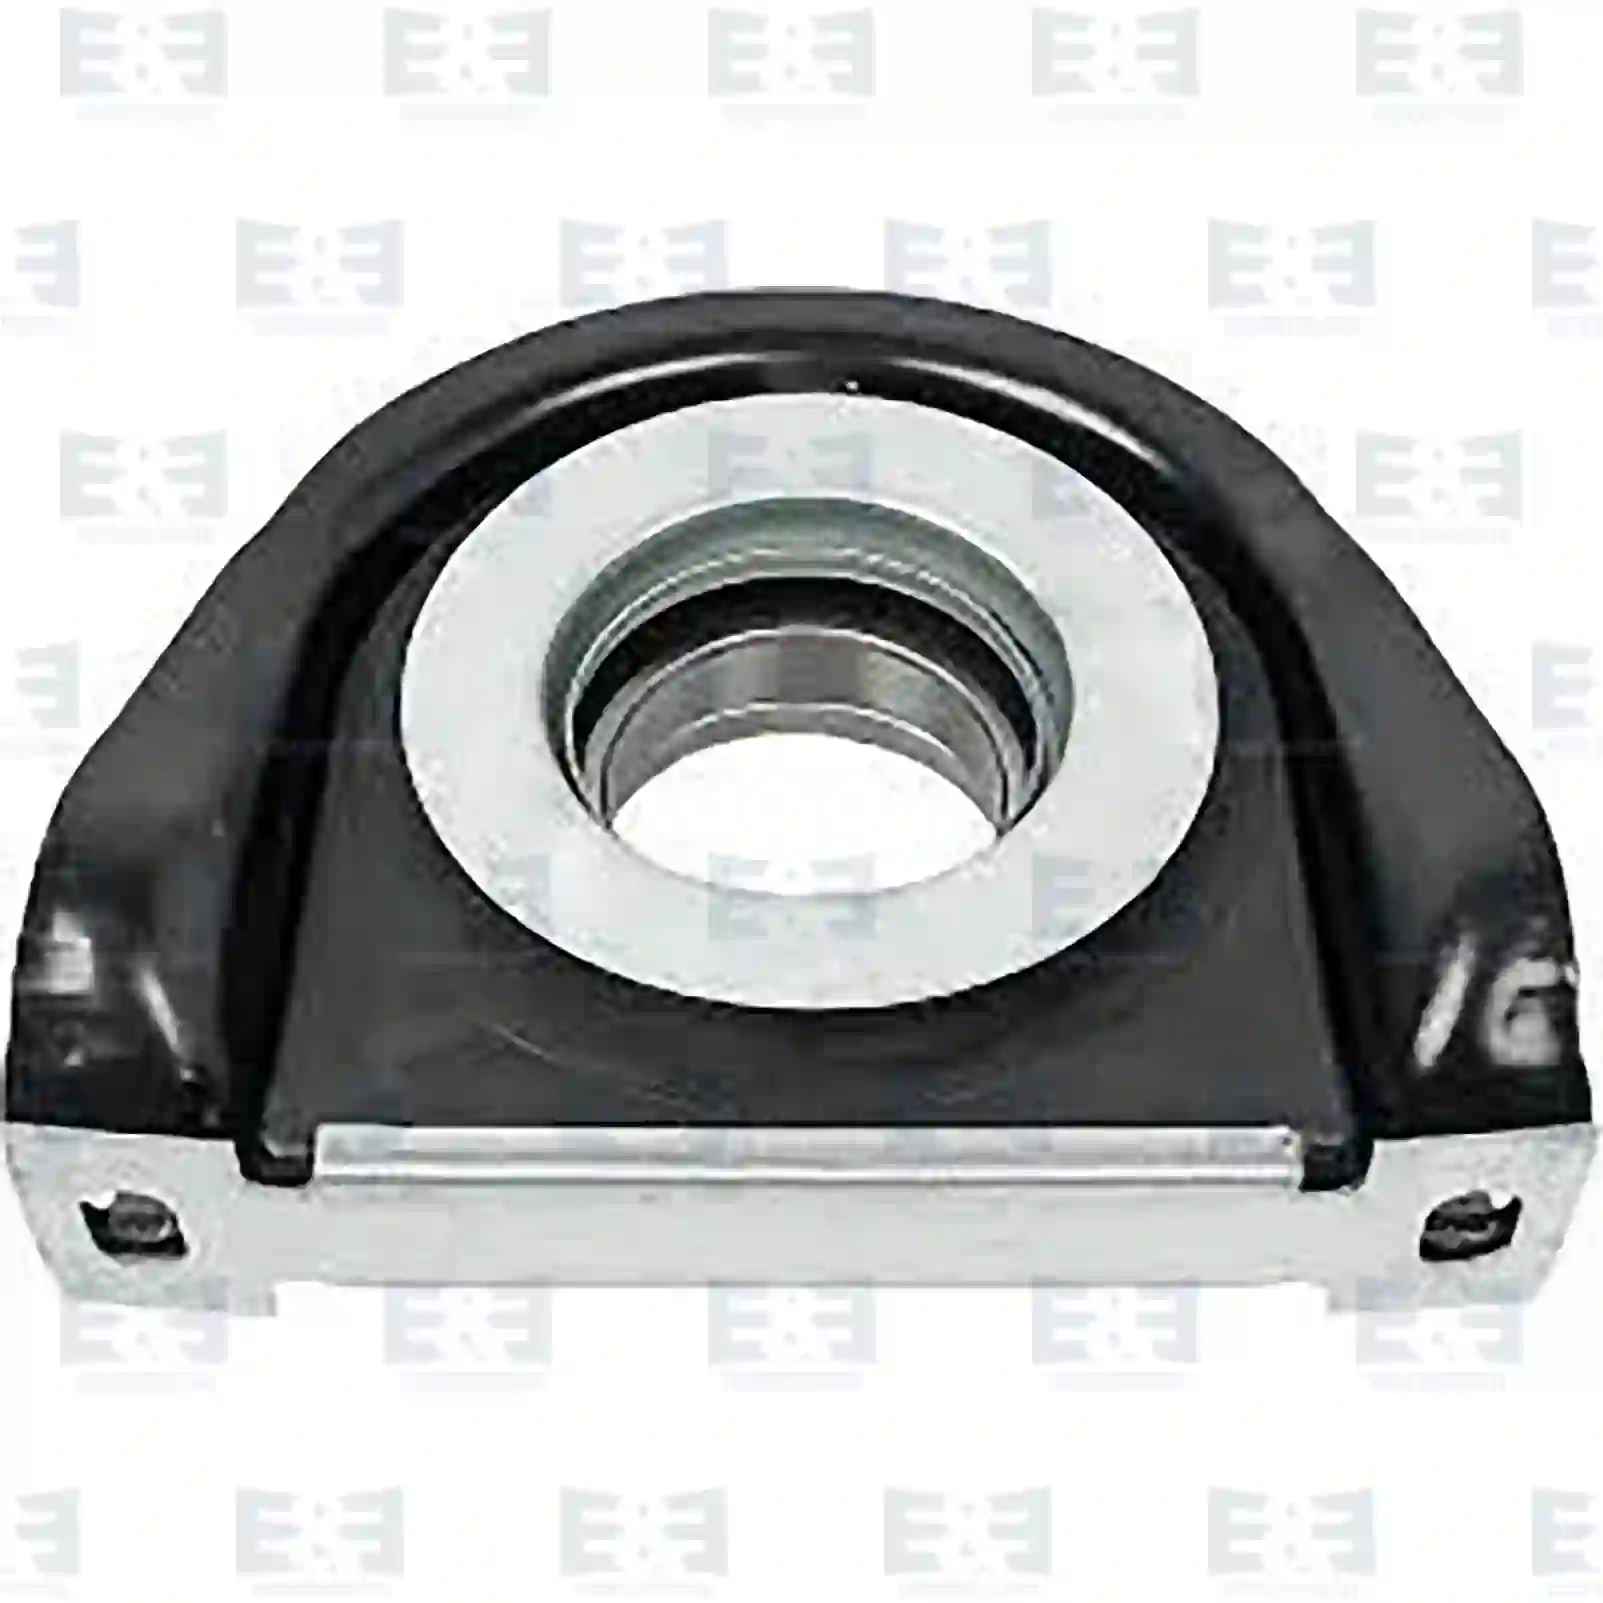 Support Bearing Center bearing, EE No 2E2276983 ,  oem no:42087542, 42536963, 42541437, 42560645, 93163689, 93190884, 1068222, 20471428, ZG02474-0008 E&E Truck Spare Parts | Truck Spare Parts, Auotomotive Spare Parts